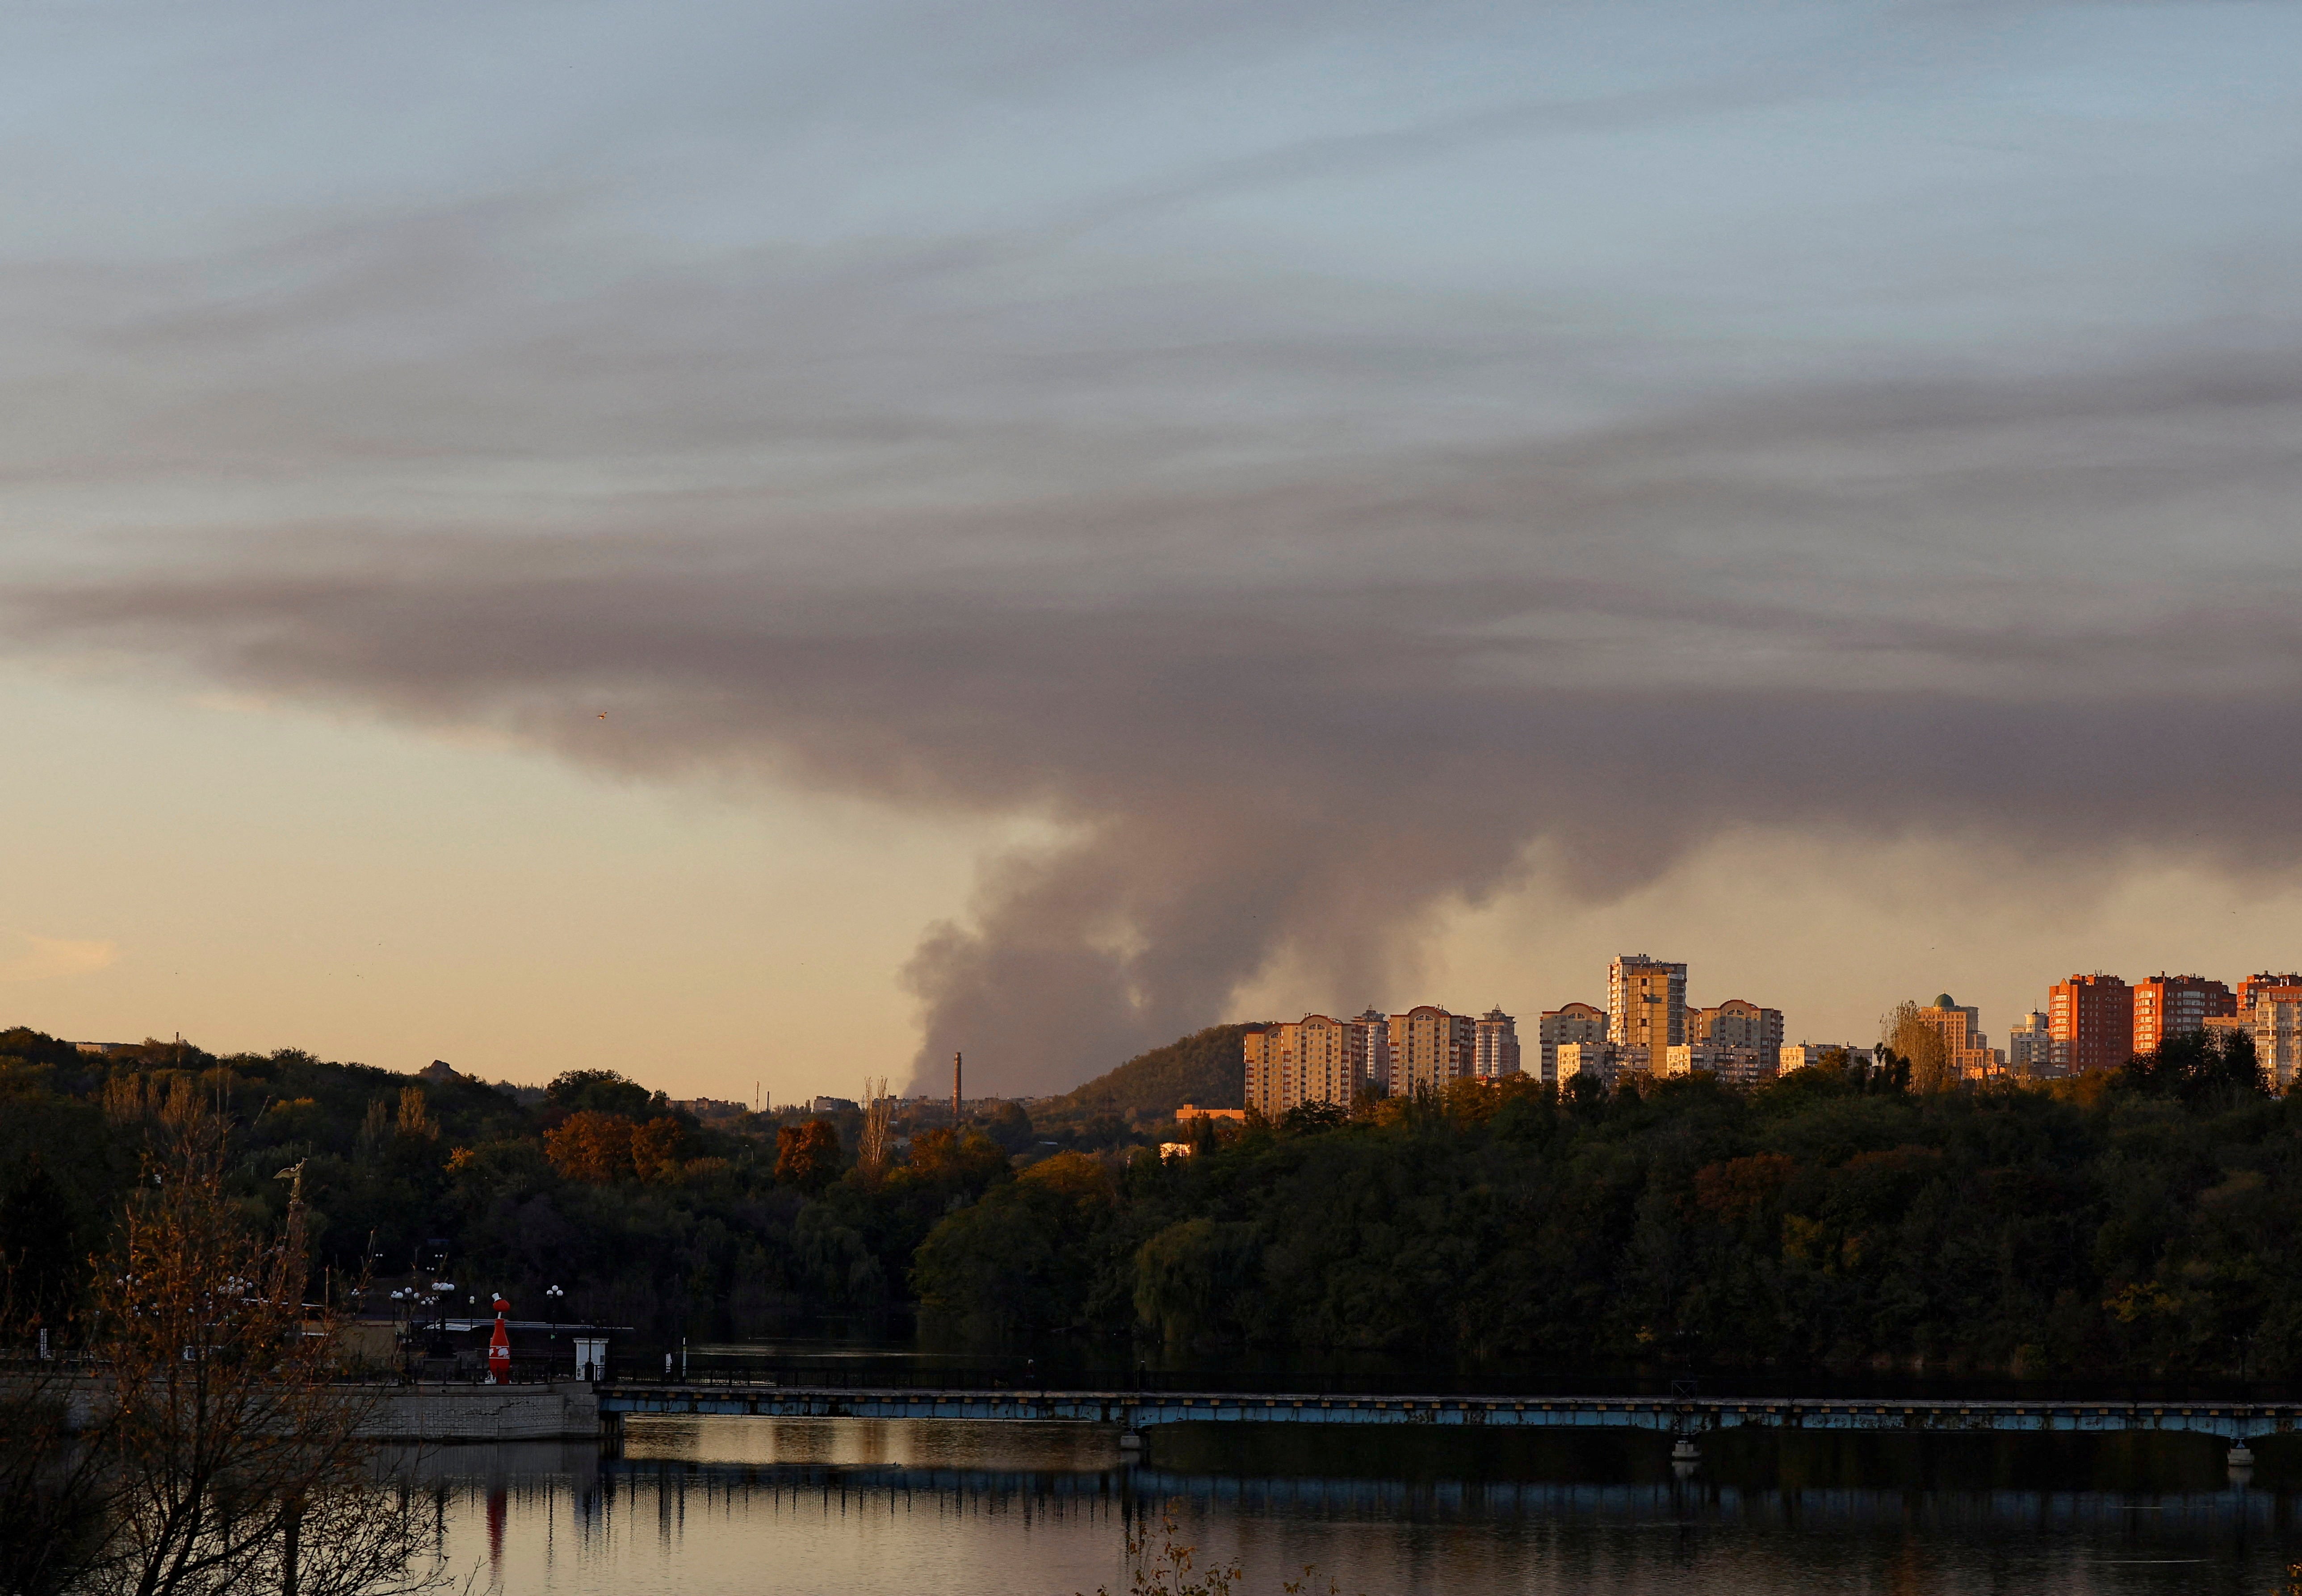 Smoke rises from an area in the direction of Avdiivka, as seen from Donetsk, on 11 October